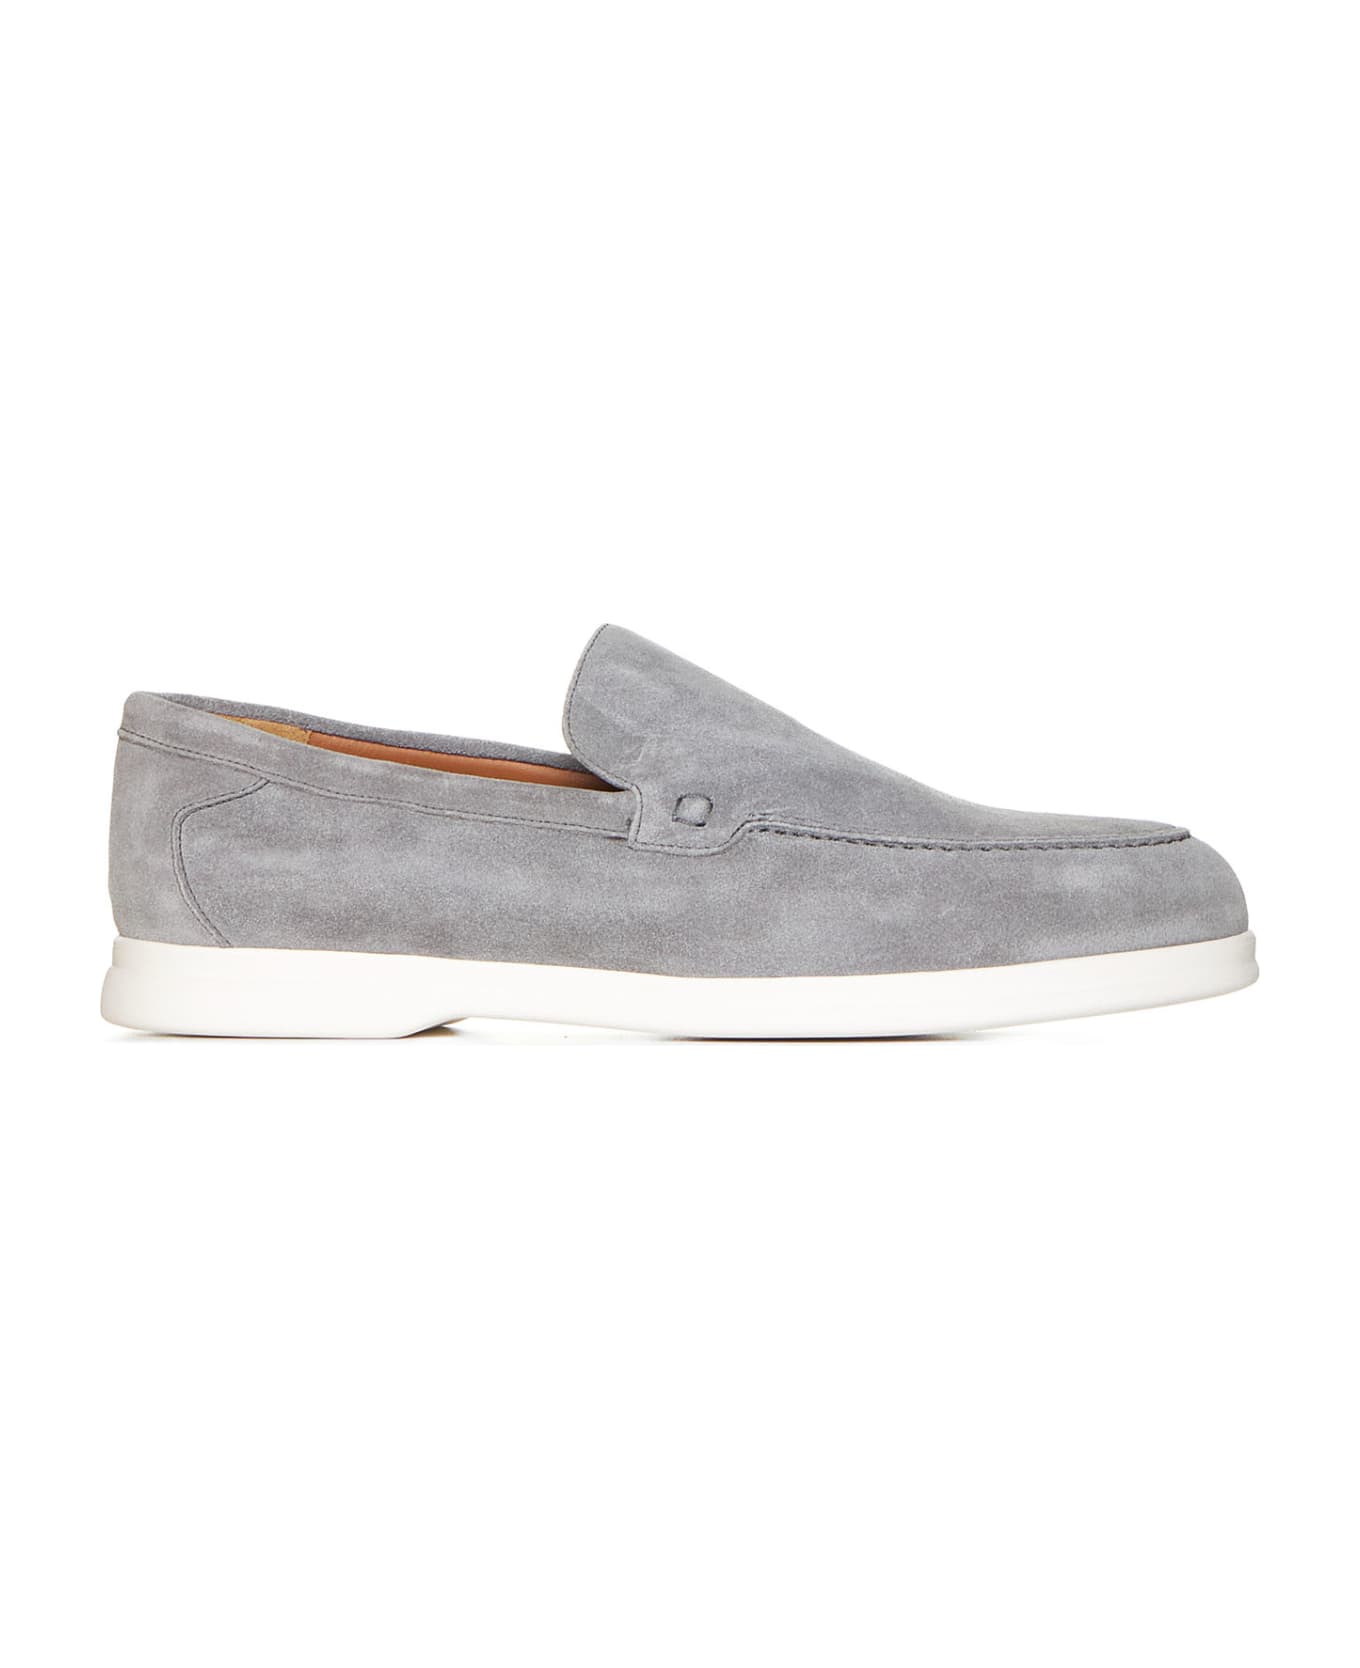 Doucal's Loafers - Iron + f.do bianco